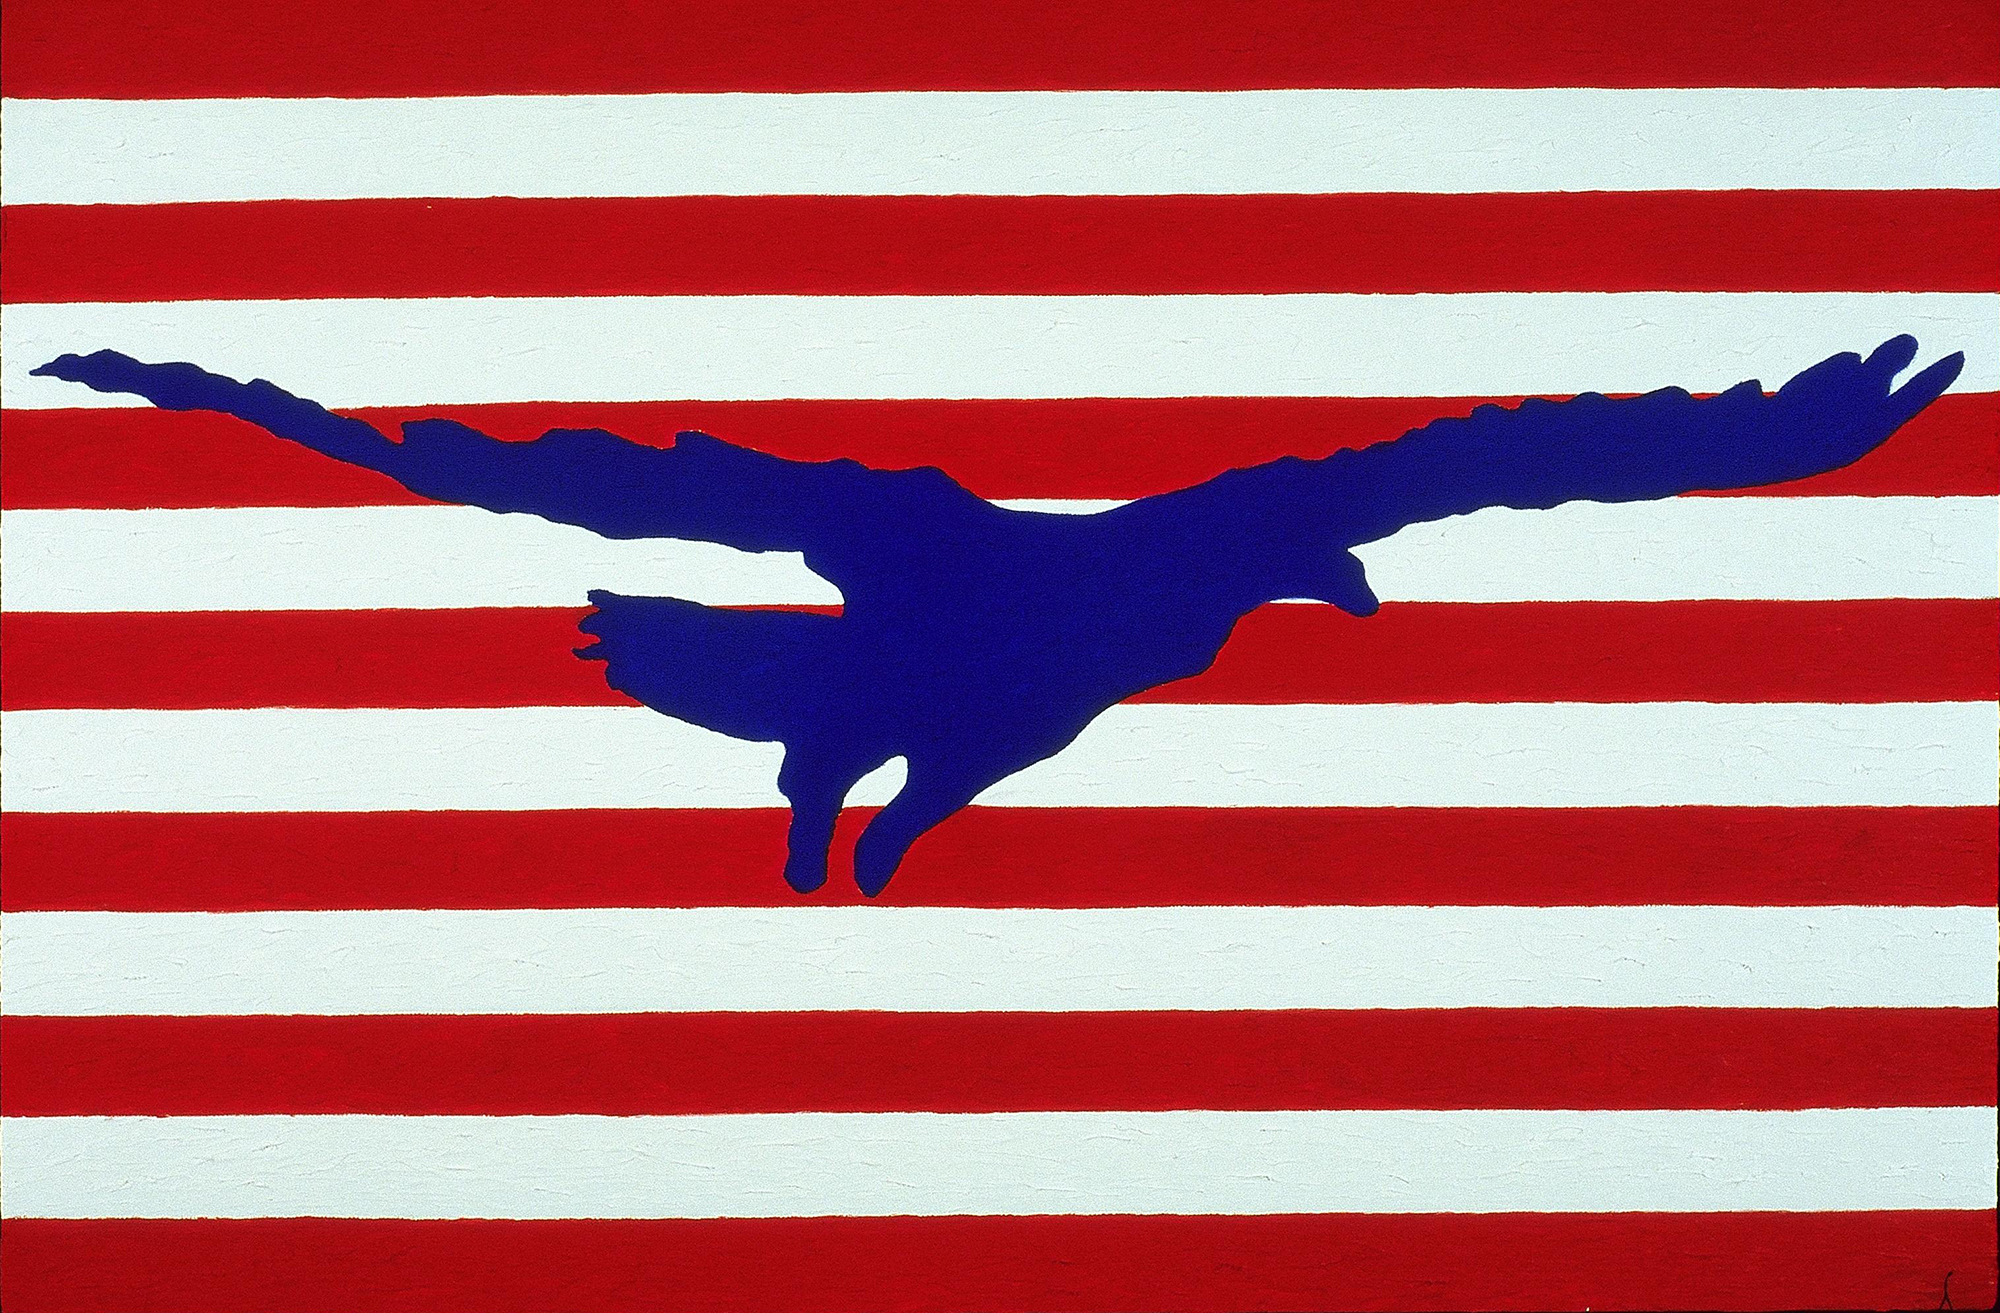 George Mullen, Sept 11 Art / 911 Art: Freedom Takes Flight, 2001, 24" x 36", oil on canvas. Copyright © 2001 George Mullen. All Rights Reserved.